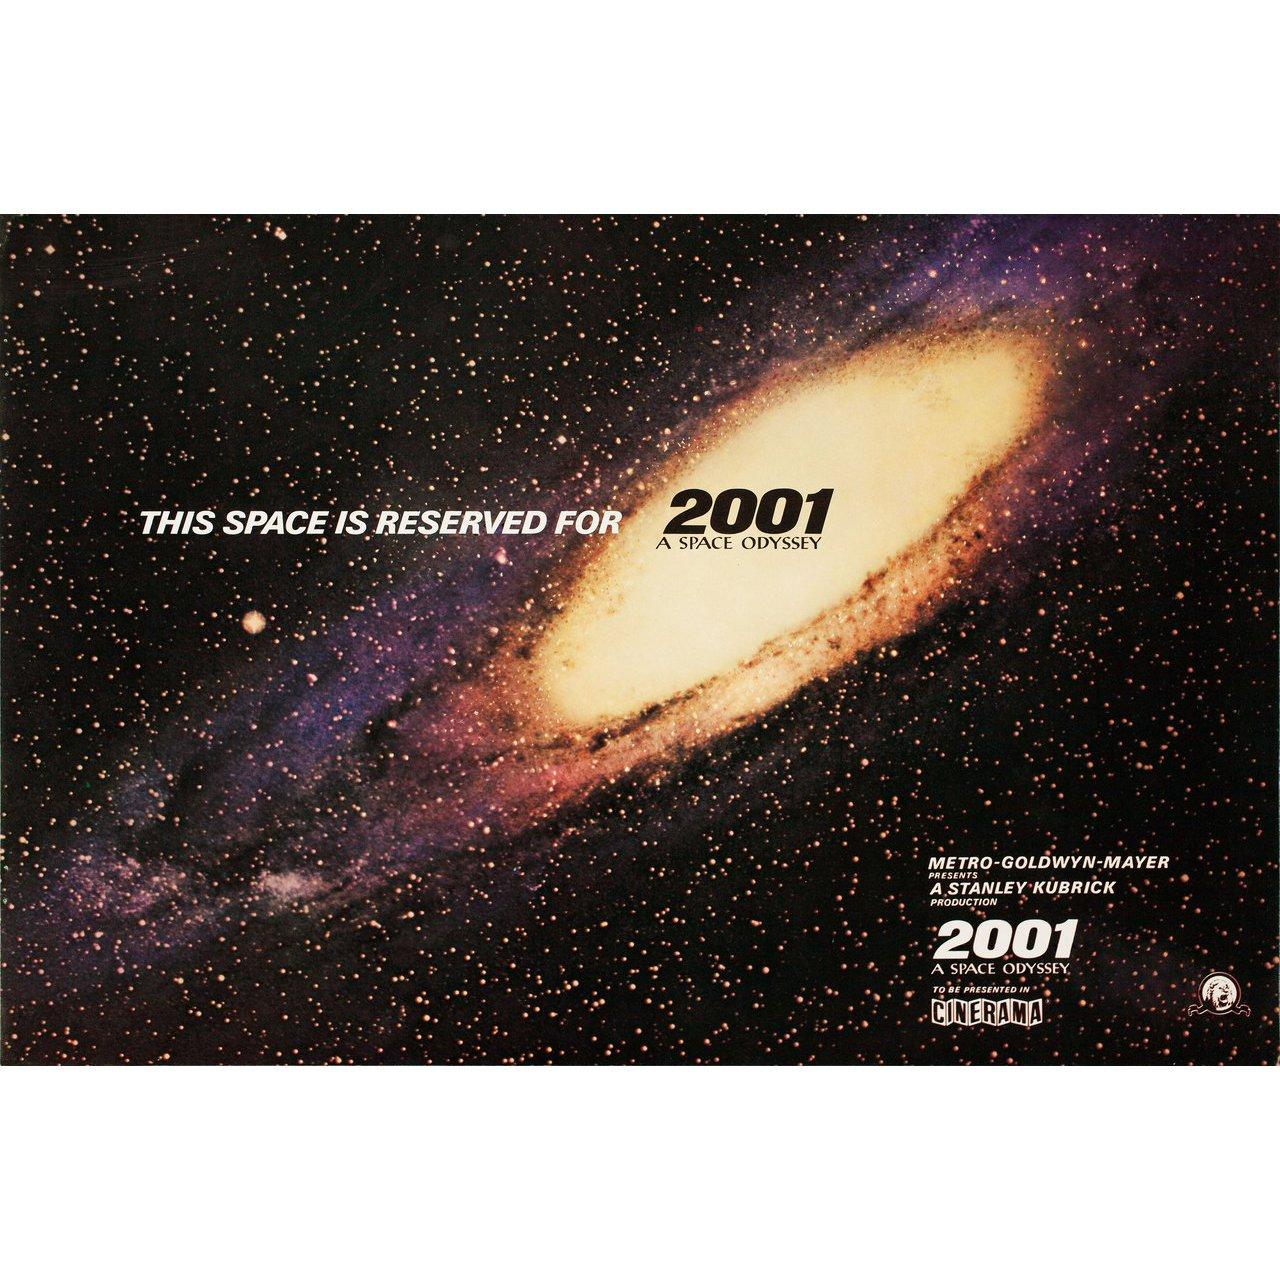 Original 1968 U.S. mini poster for the film 2001: A Space Odyssey directed by Stanley Kubrick with Keir Dullea / Gary Lockwood / William Sylvester / Daniel Richter. Fine condition, rolled. Please note: the size is stated in inches and the actual